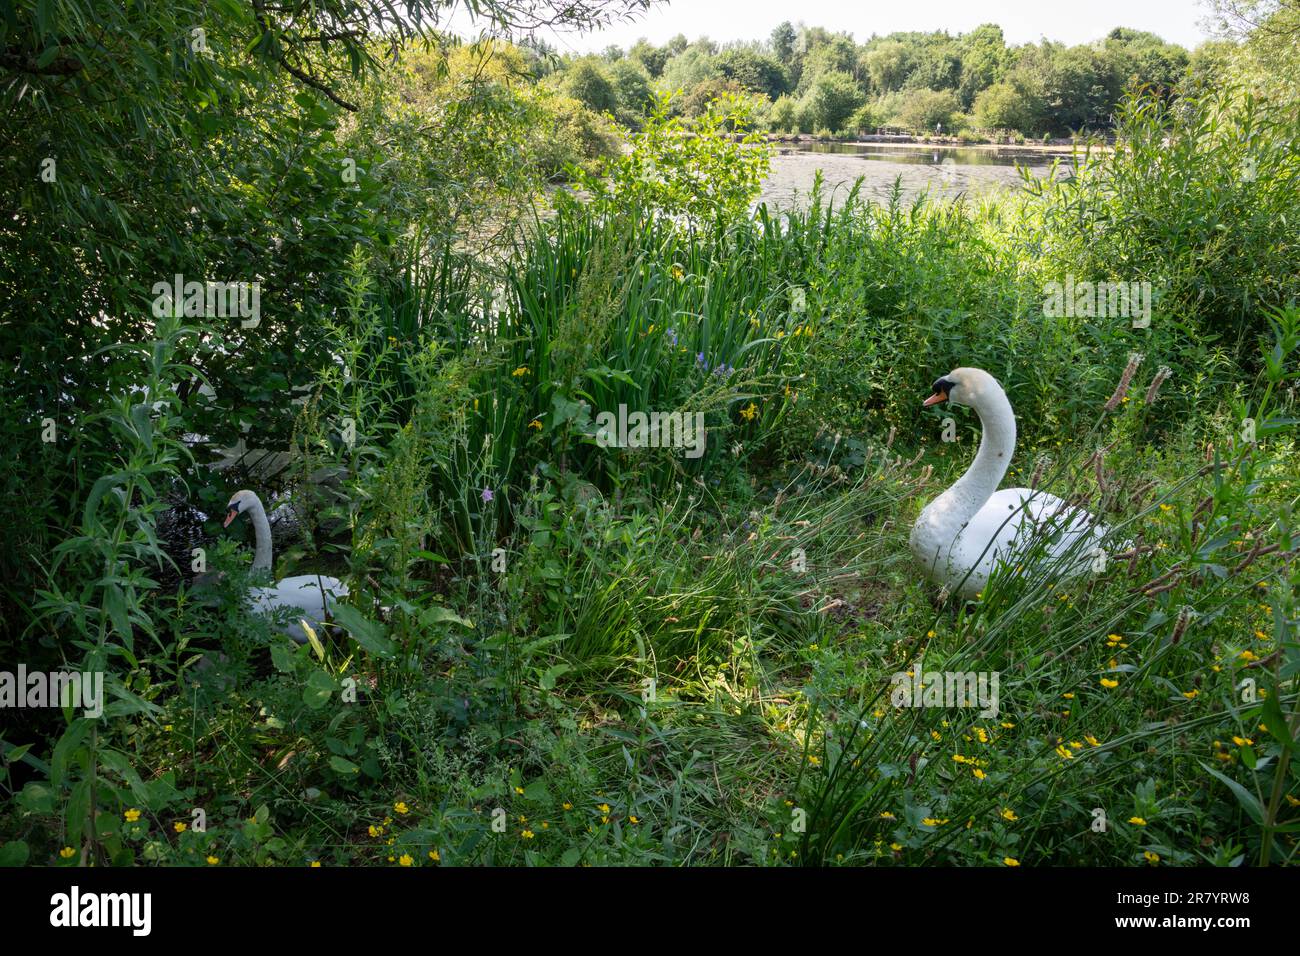 Schwäne im Red Vale Country Park, Stockport, Greater Manchester, England. Stockfoto